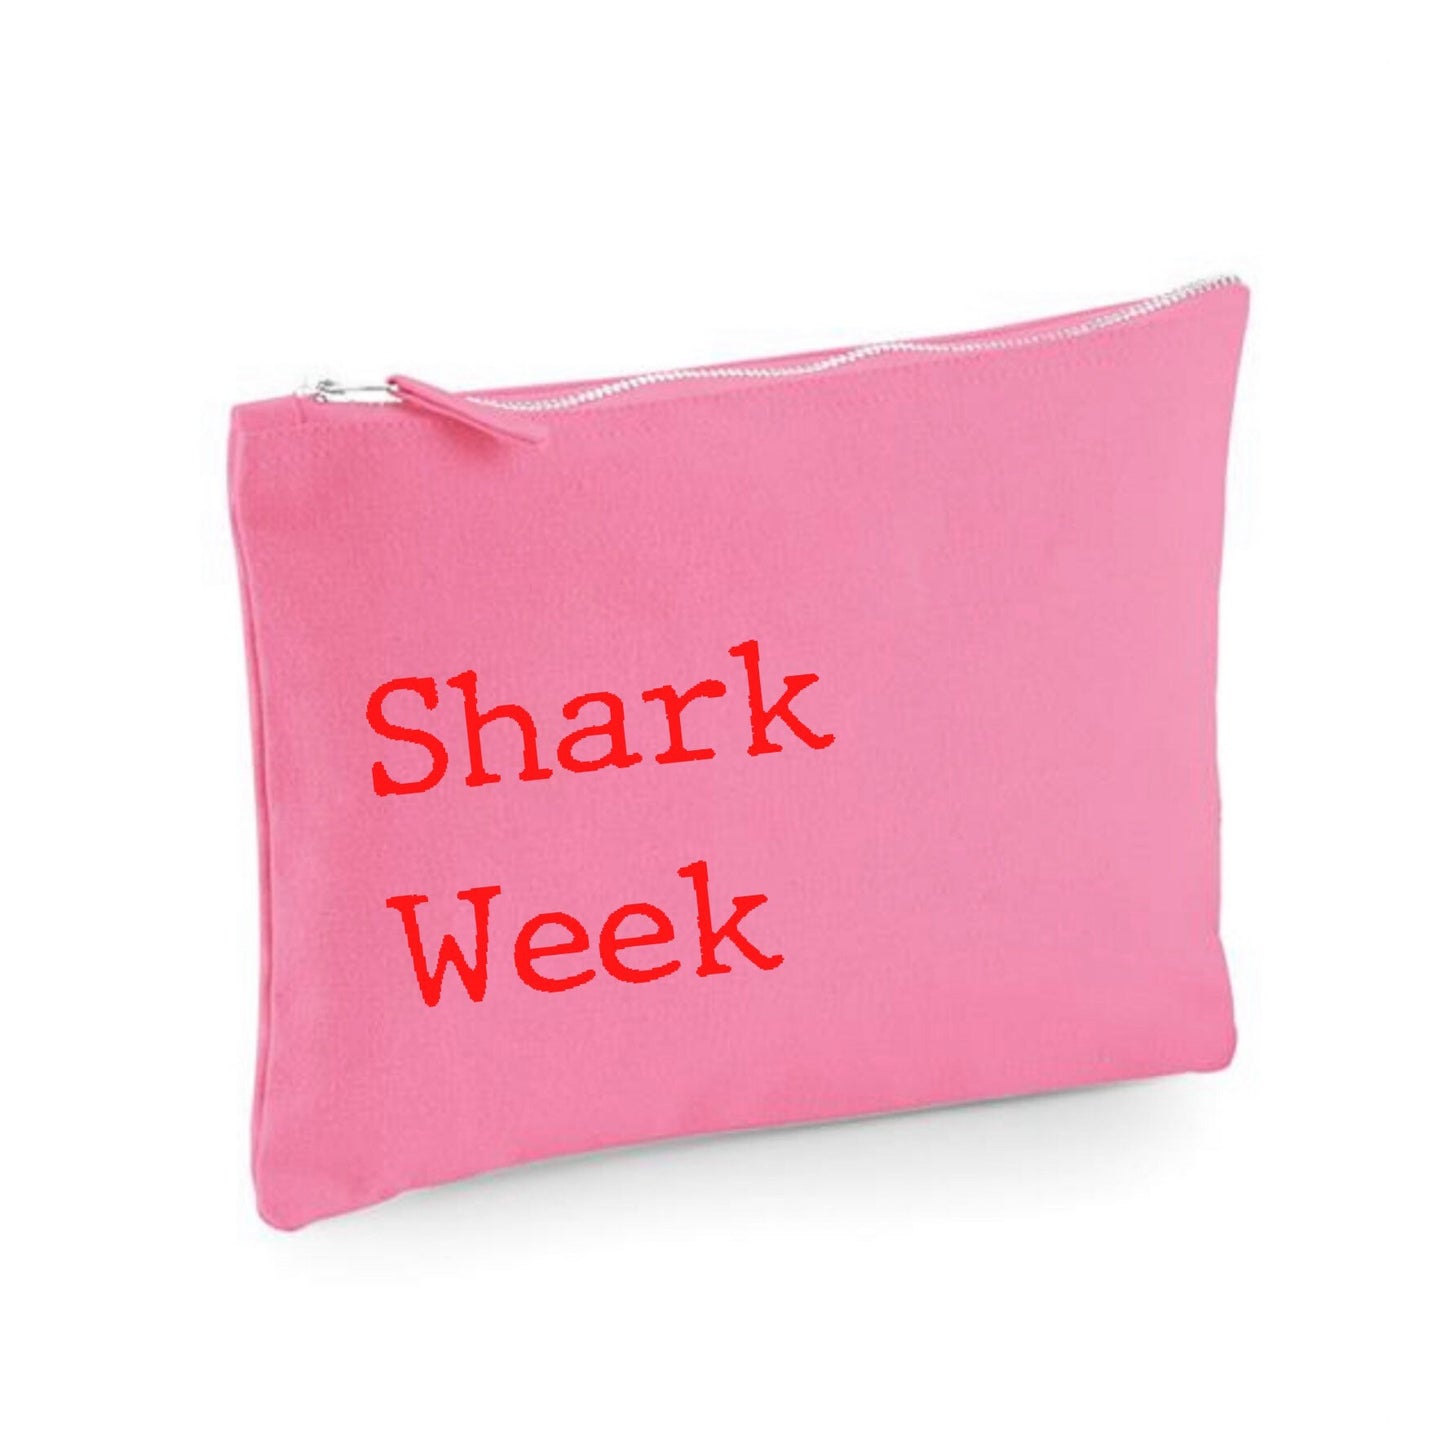 Shark week, pouch for storing ladies menstrual sanitary products, starting period gift for daughter, girly things pouch